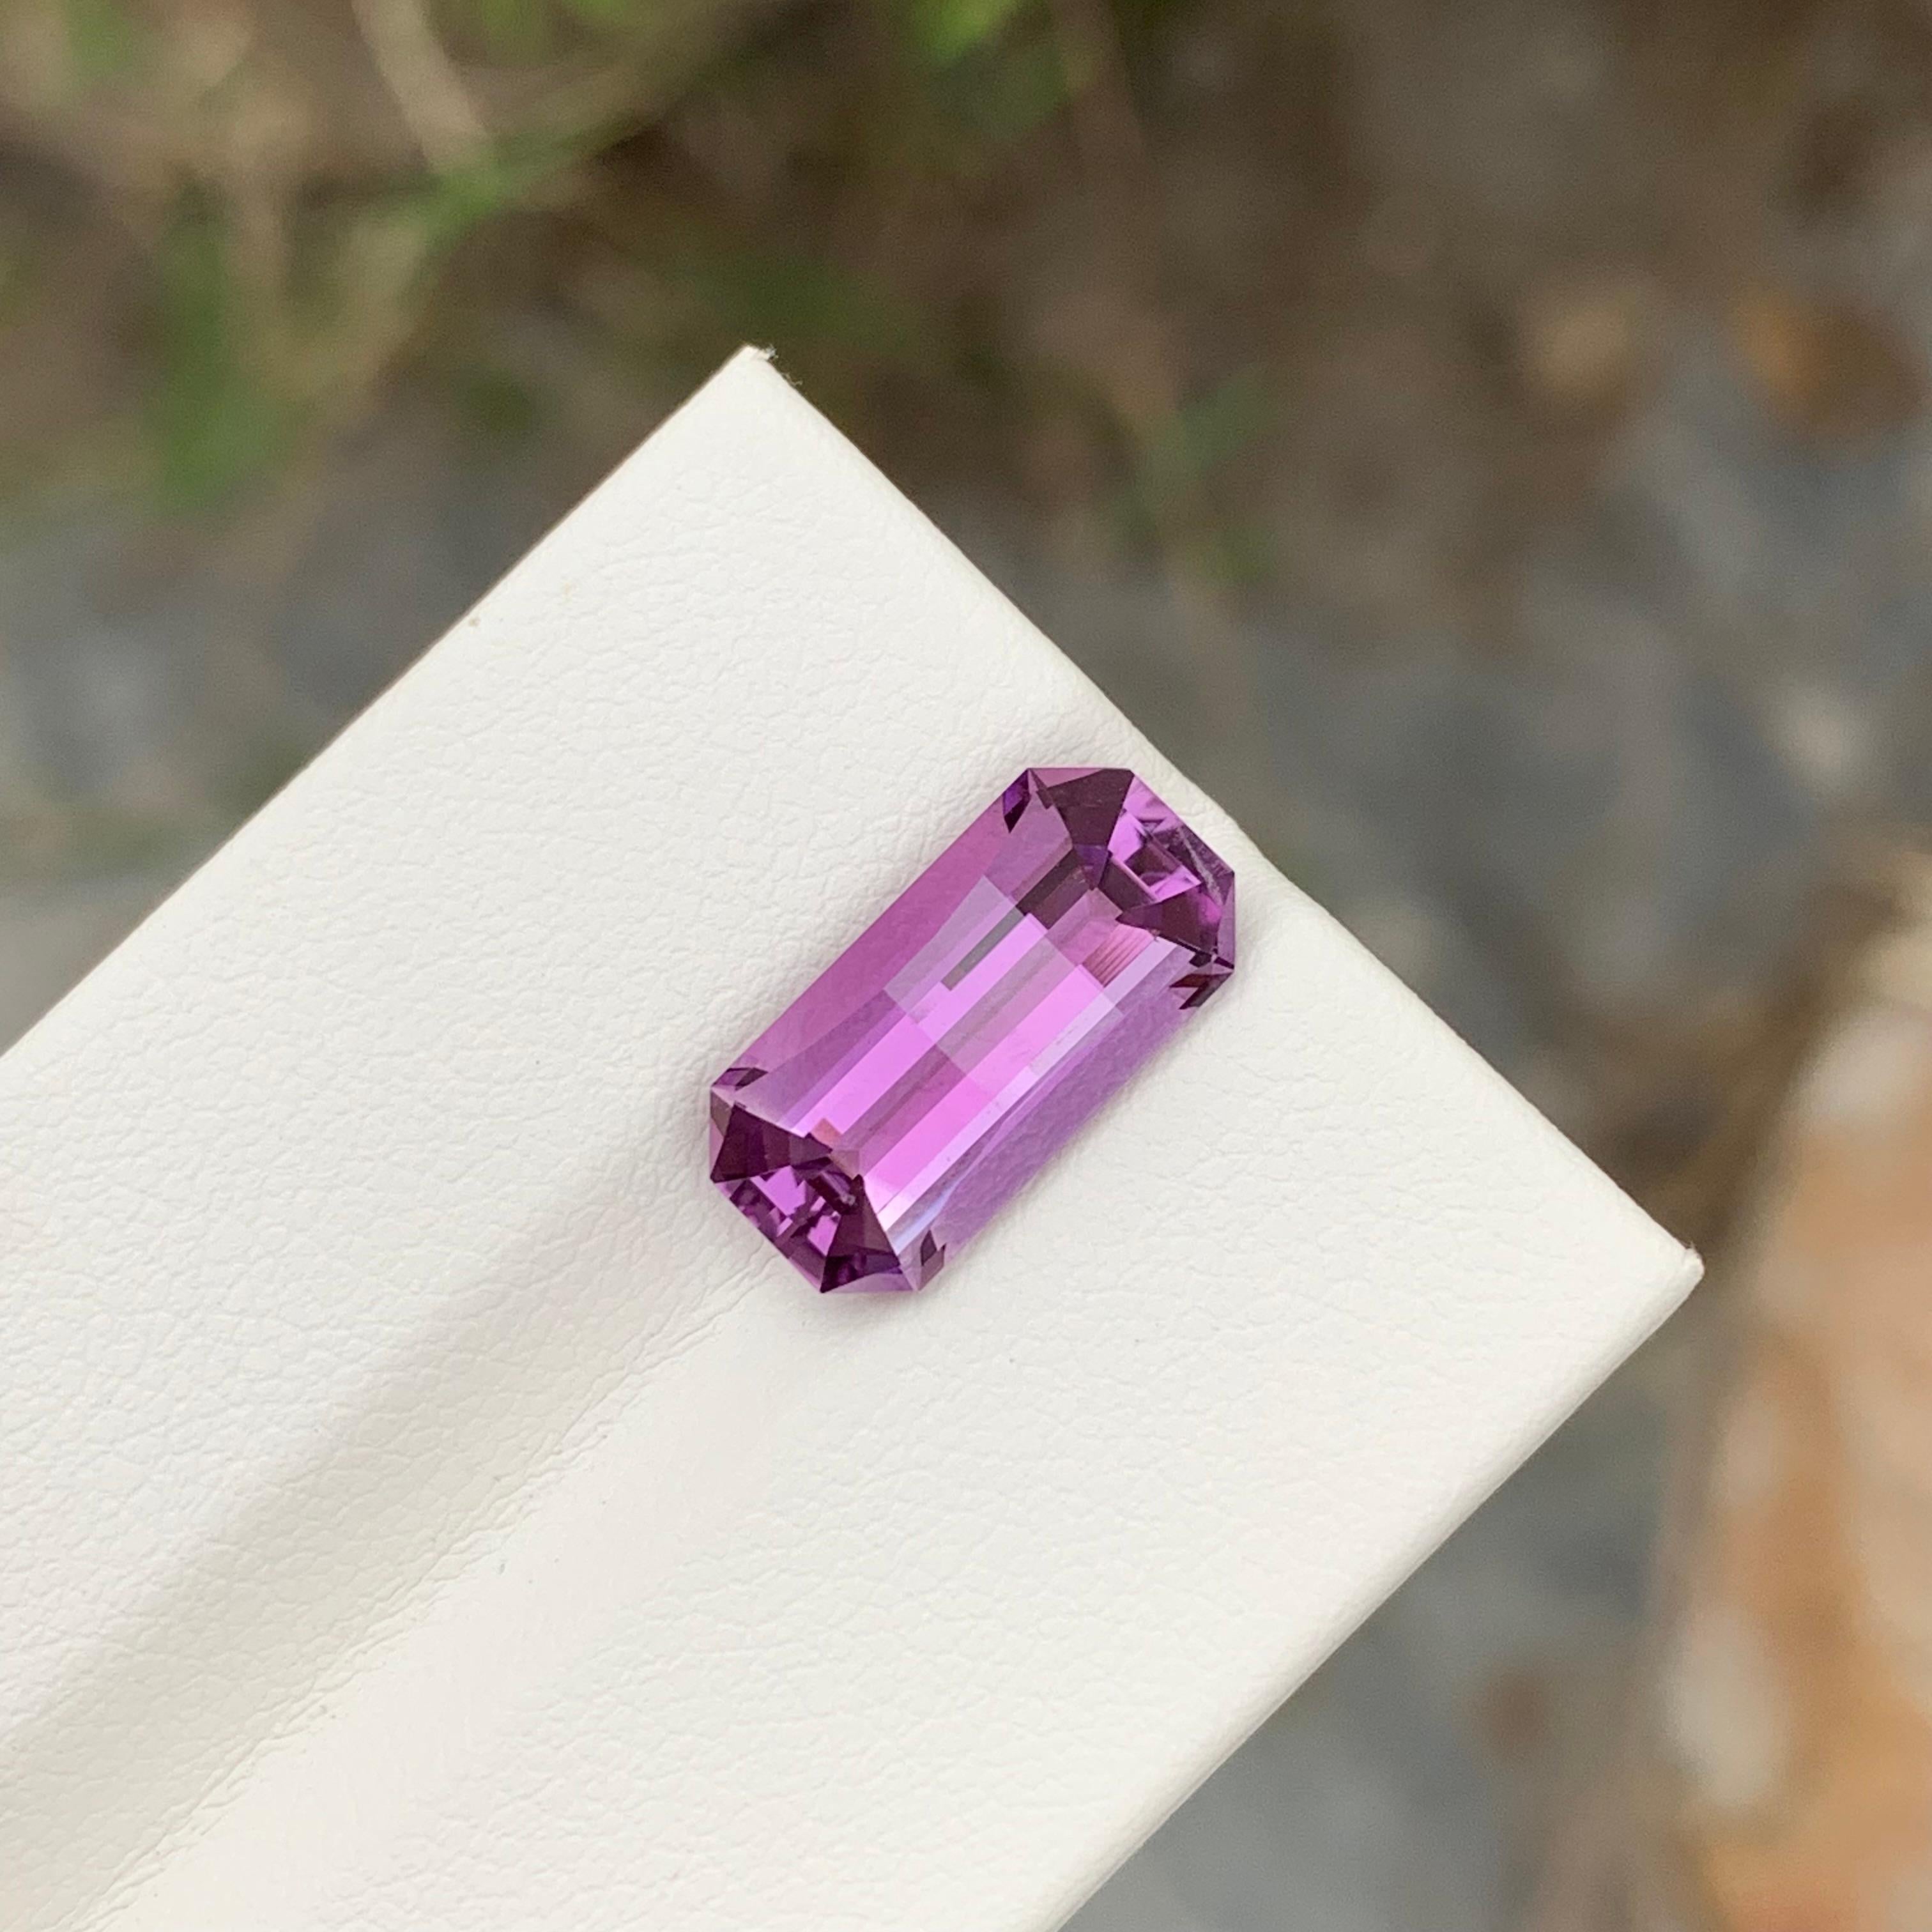 Loose Amethyst
Weight: 4.00 Carats
Dimension: 14.7 x 7.2 x 5.5 Mm
Colour: Purple
Origin: Brazil
Treatment: Non
Certificate: On Demand
Shape: Emerald 

Amethyst, a stunning variety of quartz known for its mesmerizing purple hue, has captivated humans